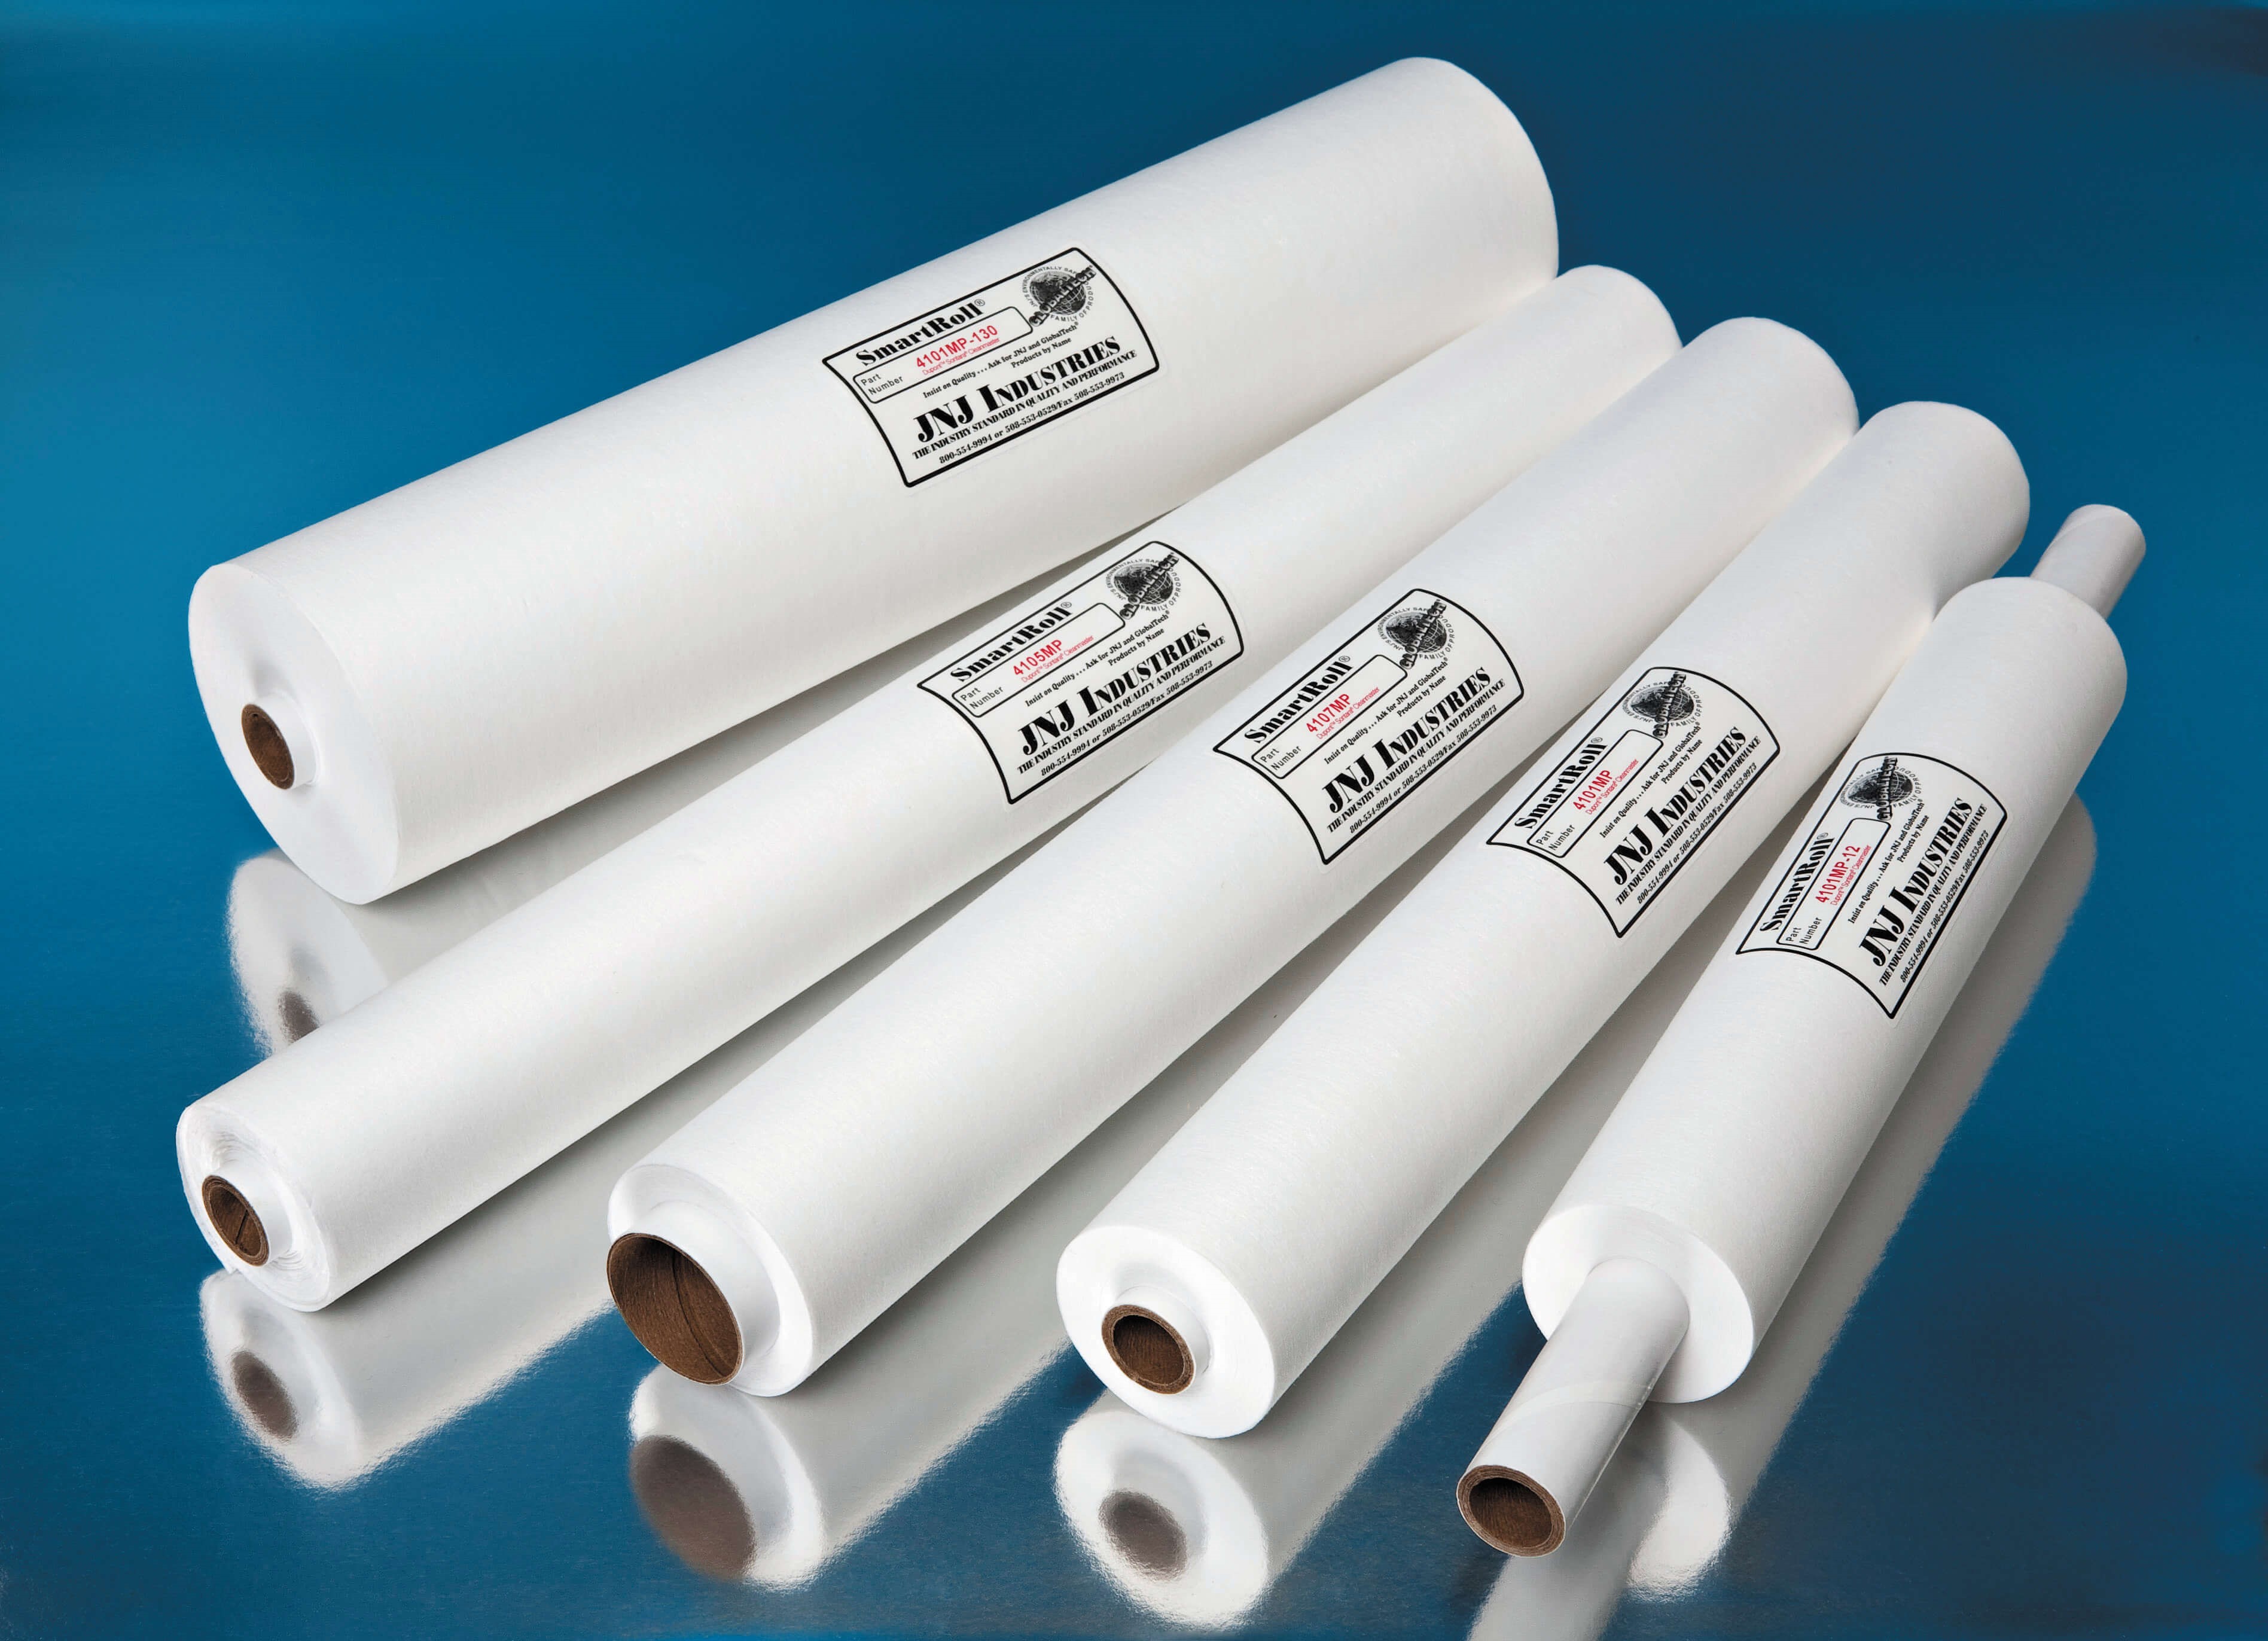 Most common roll for most MPM printers, 3/4" ID x 18" long core, 17.5" wide paper, 2.5" OD, 39' of paper, 15 rolls per case